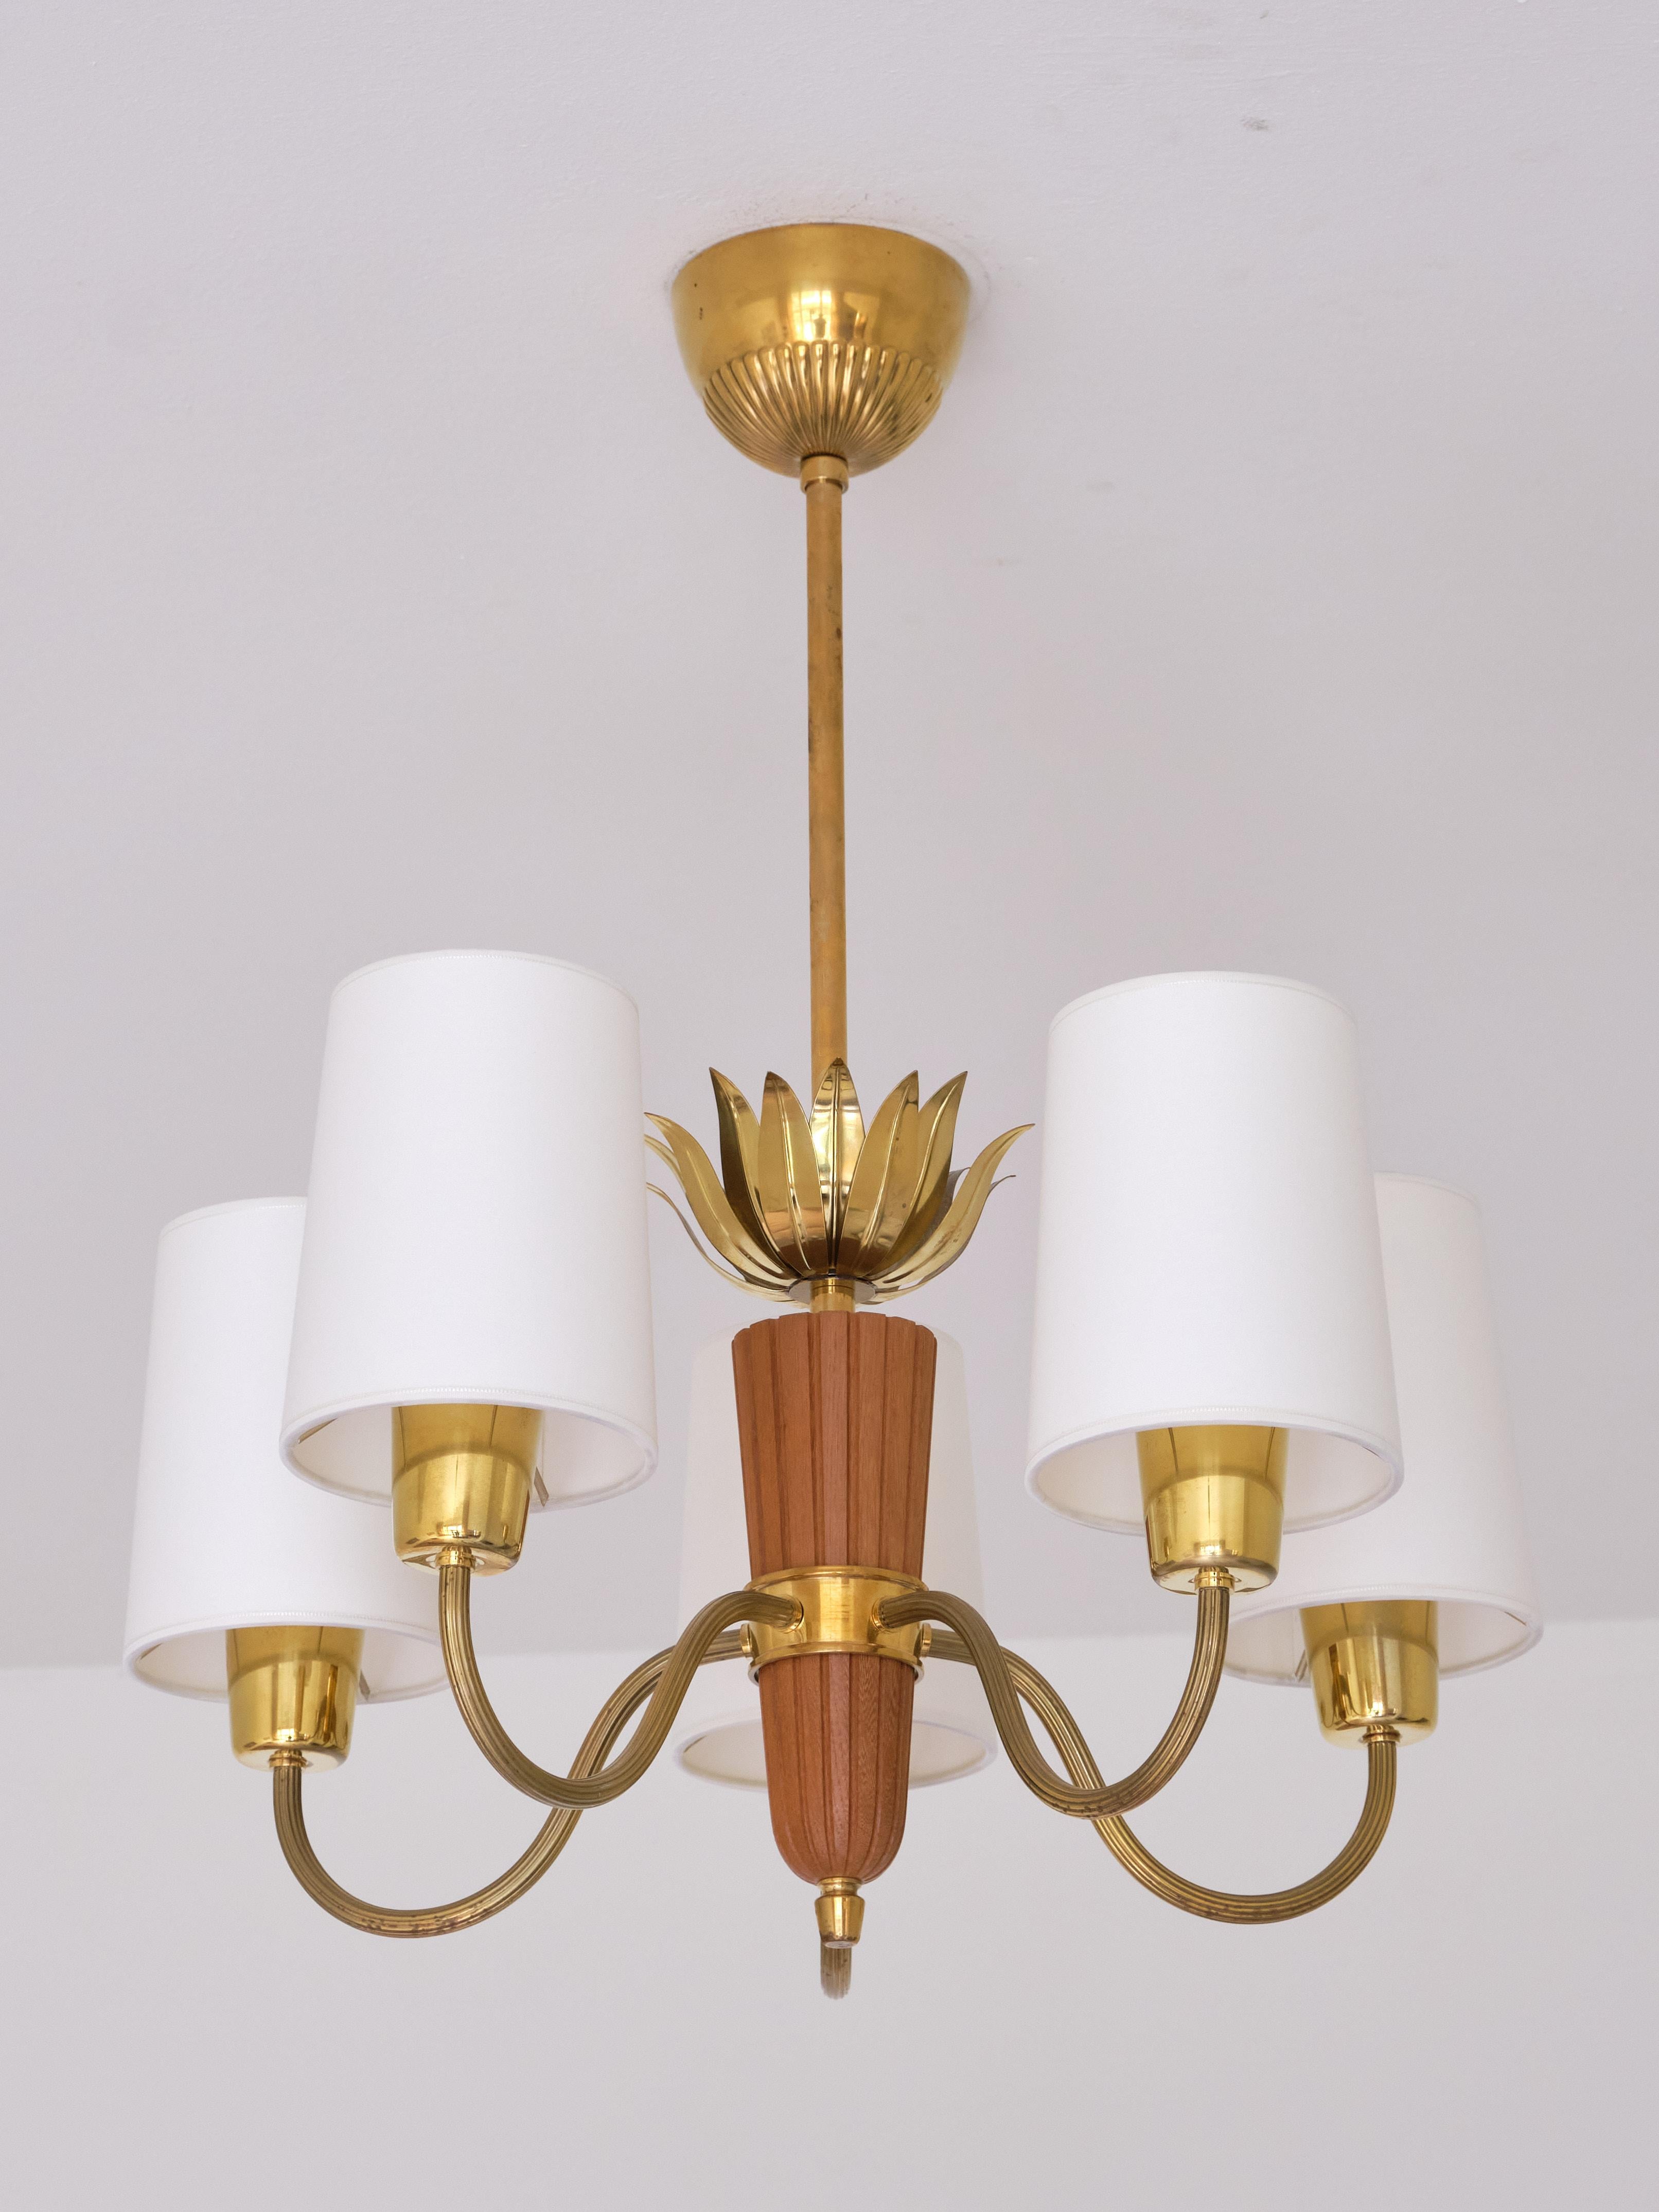 This elegant five arm chandelier was produced by ASEA in Sweden in the 1950s. The lamp consists of a brass stem, a carved oak centerpiece to which the five arms are attached. The decorative brass leaves attached to the stem and the five sculpted and